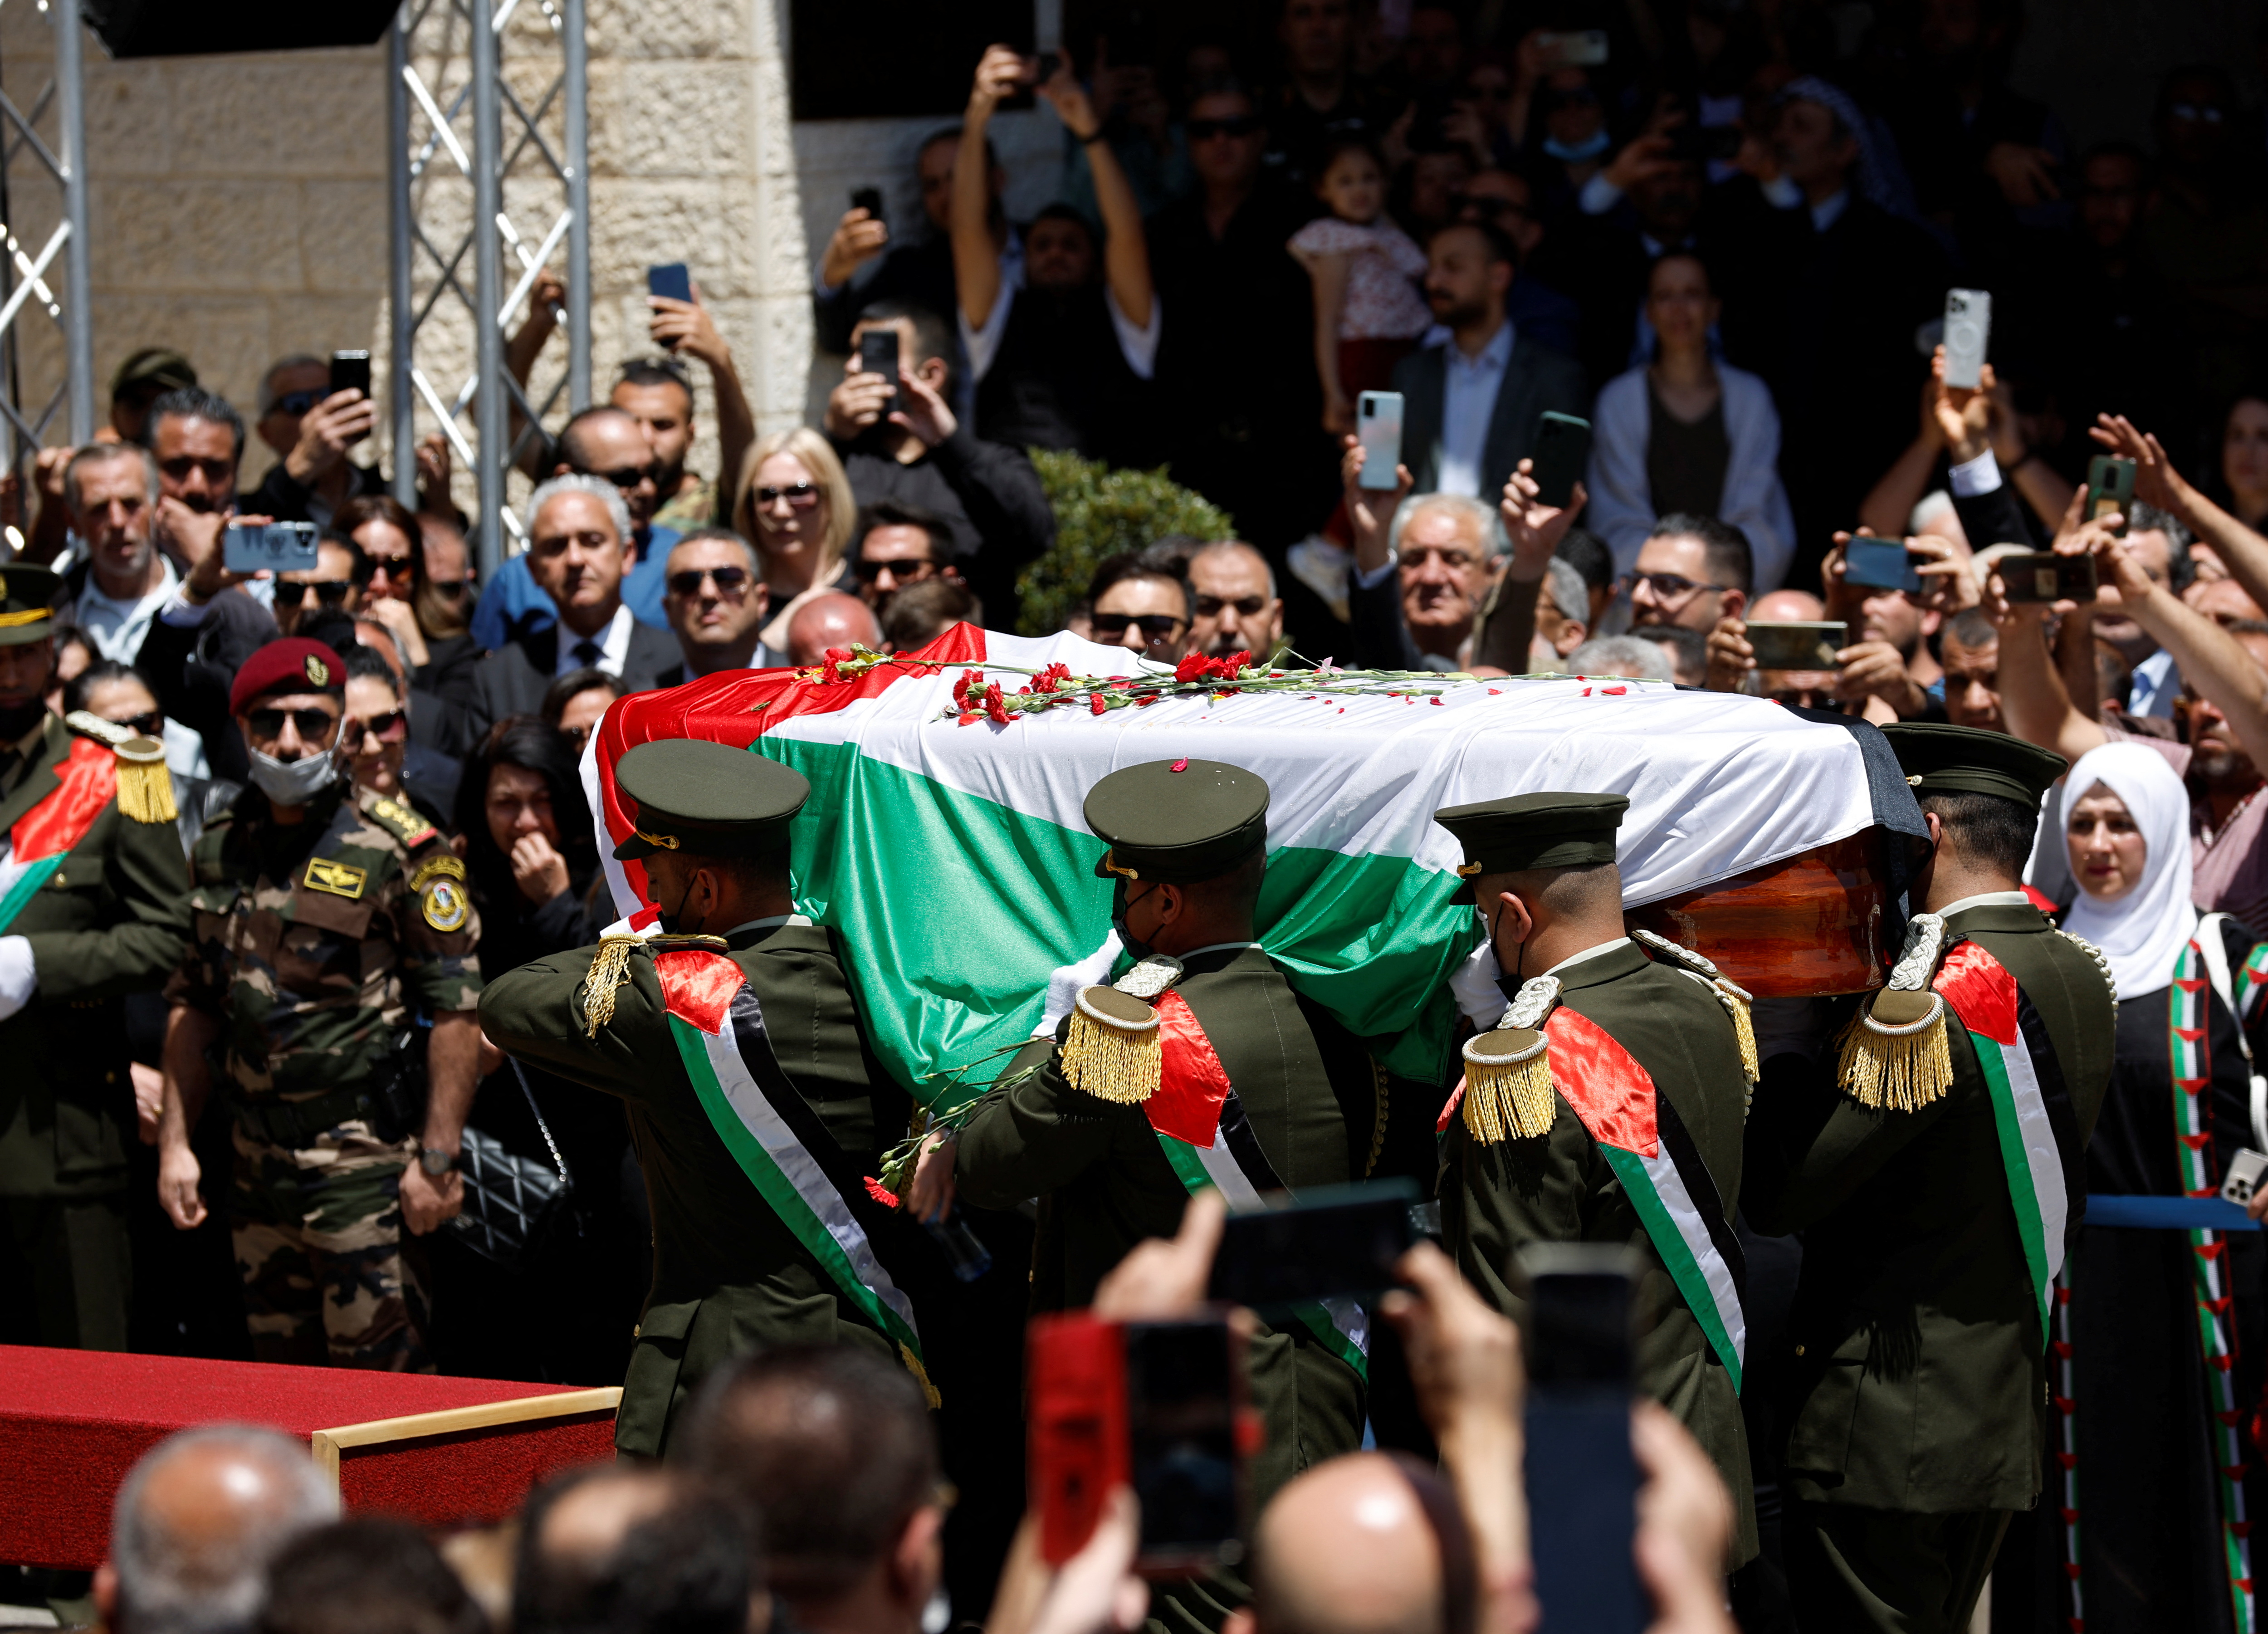 Honour guards carry the casket of Al Jazeera journalist Shireen Abu Akleh, who was killed during an Israeli raid, as Palestinians bid their farewell in Ramallah in the Israeli-occupied West Bank May 12, 2022. REUTERS/Mohamad Torokman